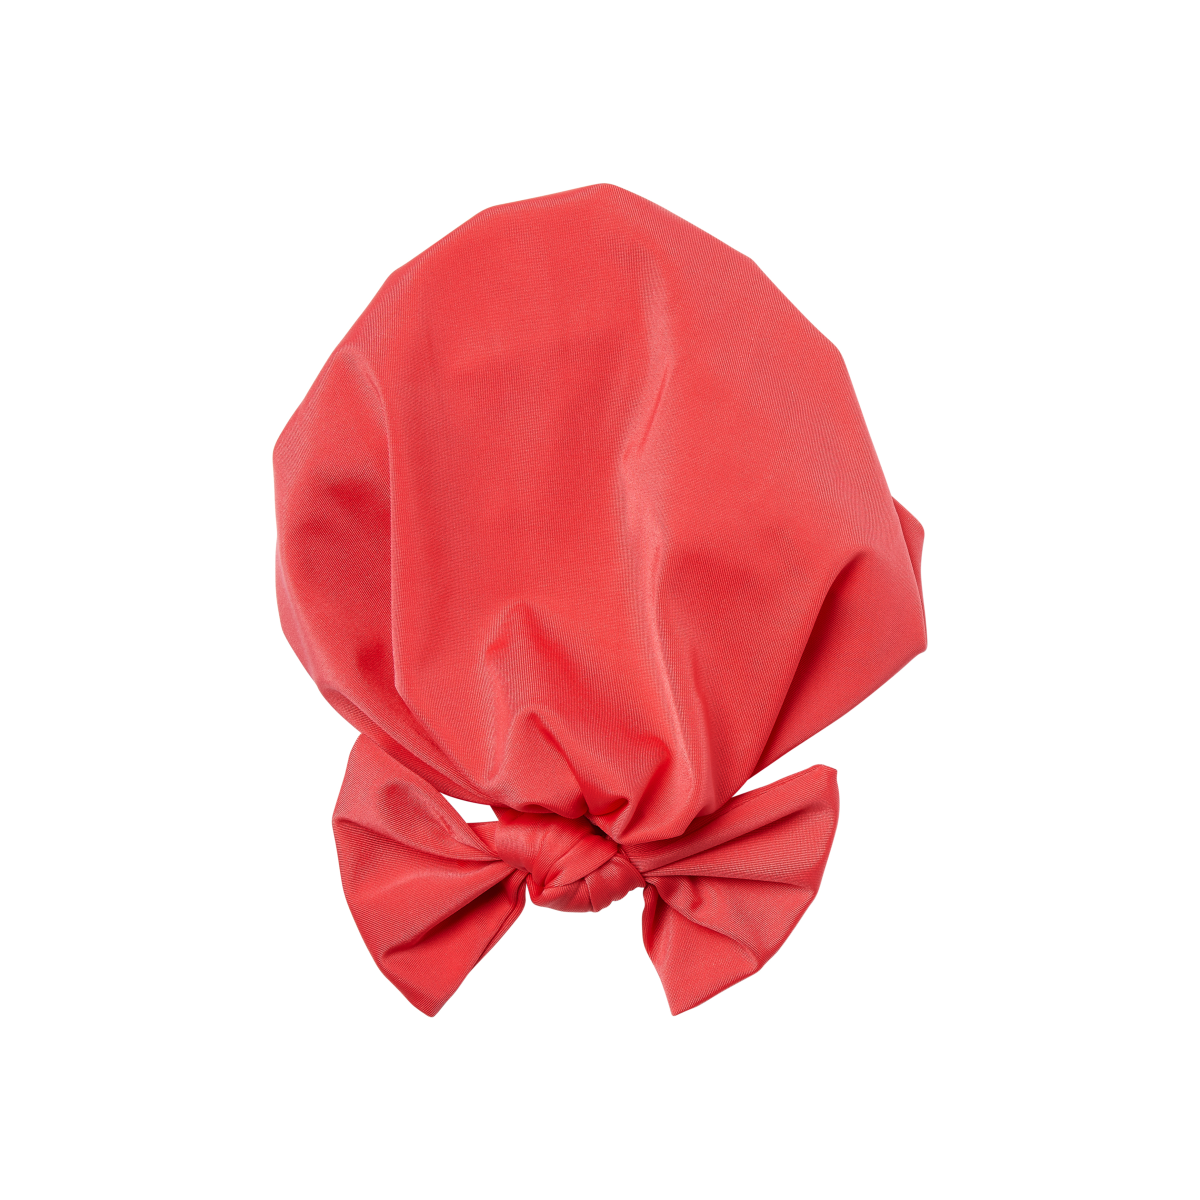 Soft &amp; Silky Pre-Tied Top Knot Bow Turban Wrap for Toddlers - Coral Pink